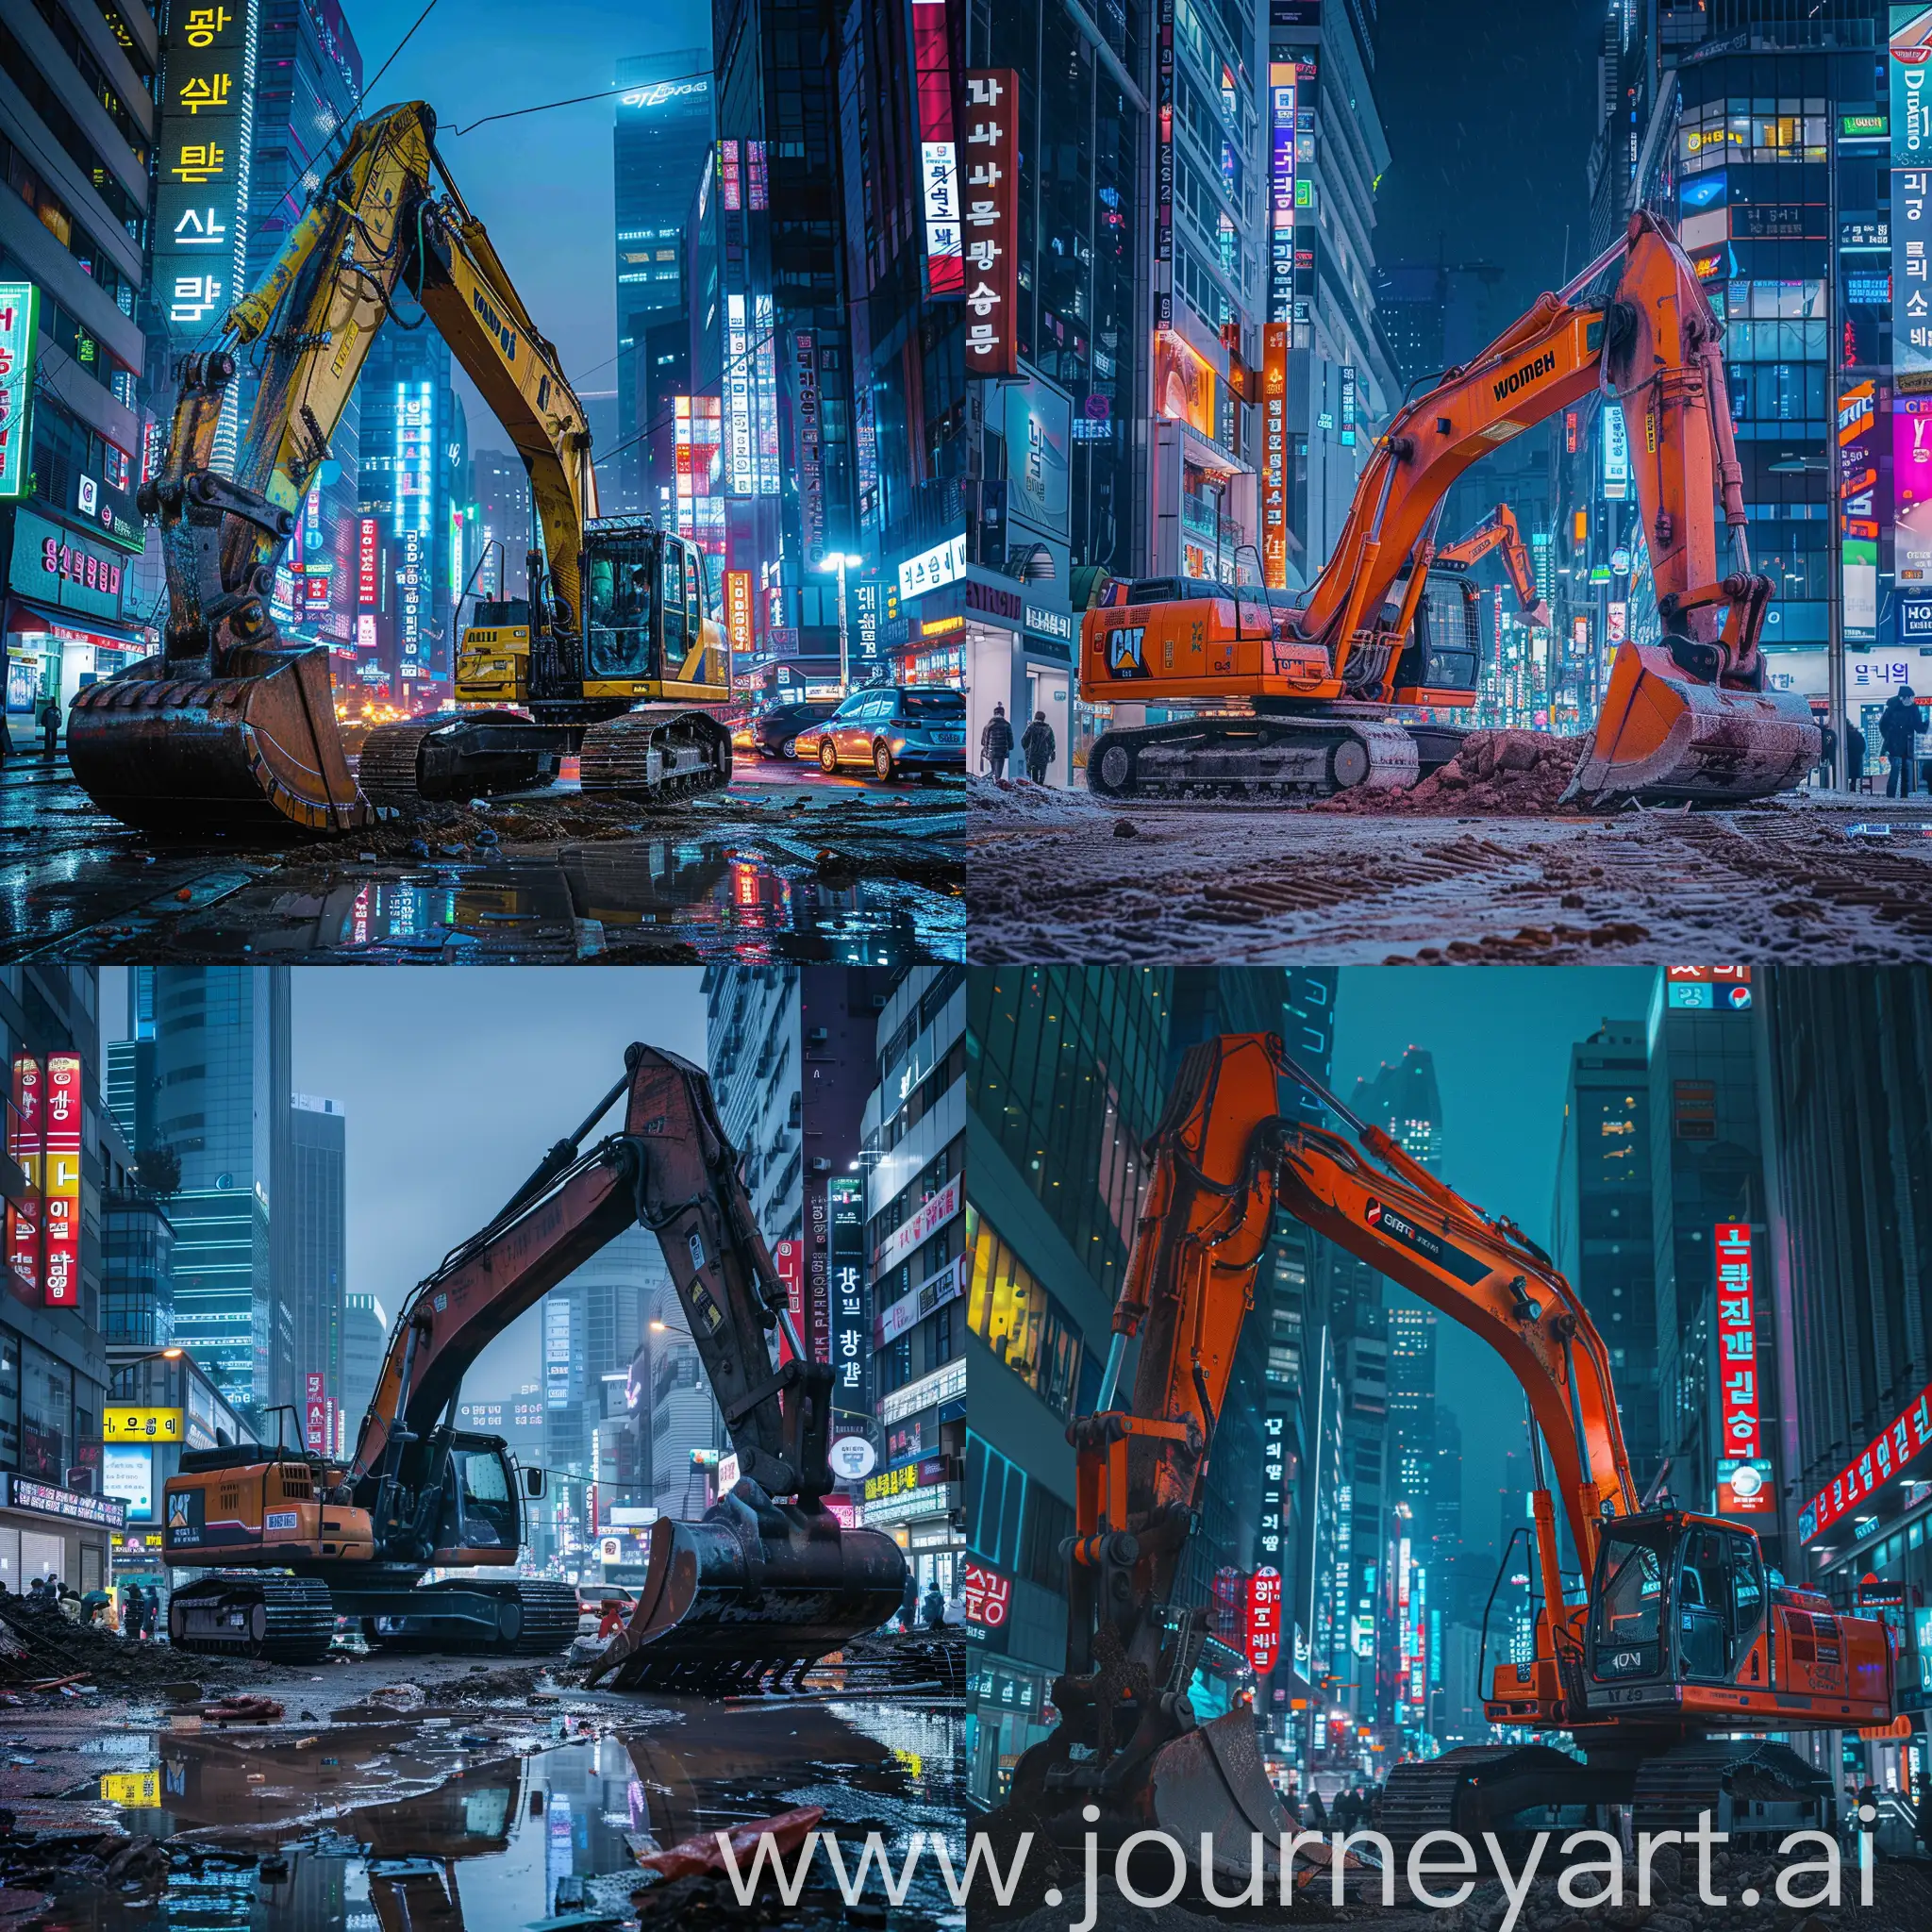 prompt: An excavator in the middle of Gangnam, Seoul, Korea, surrounded by bustling city life, skyscrapers, and neon lights, highlighting the contrast between construction machinery and the urban environment.